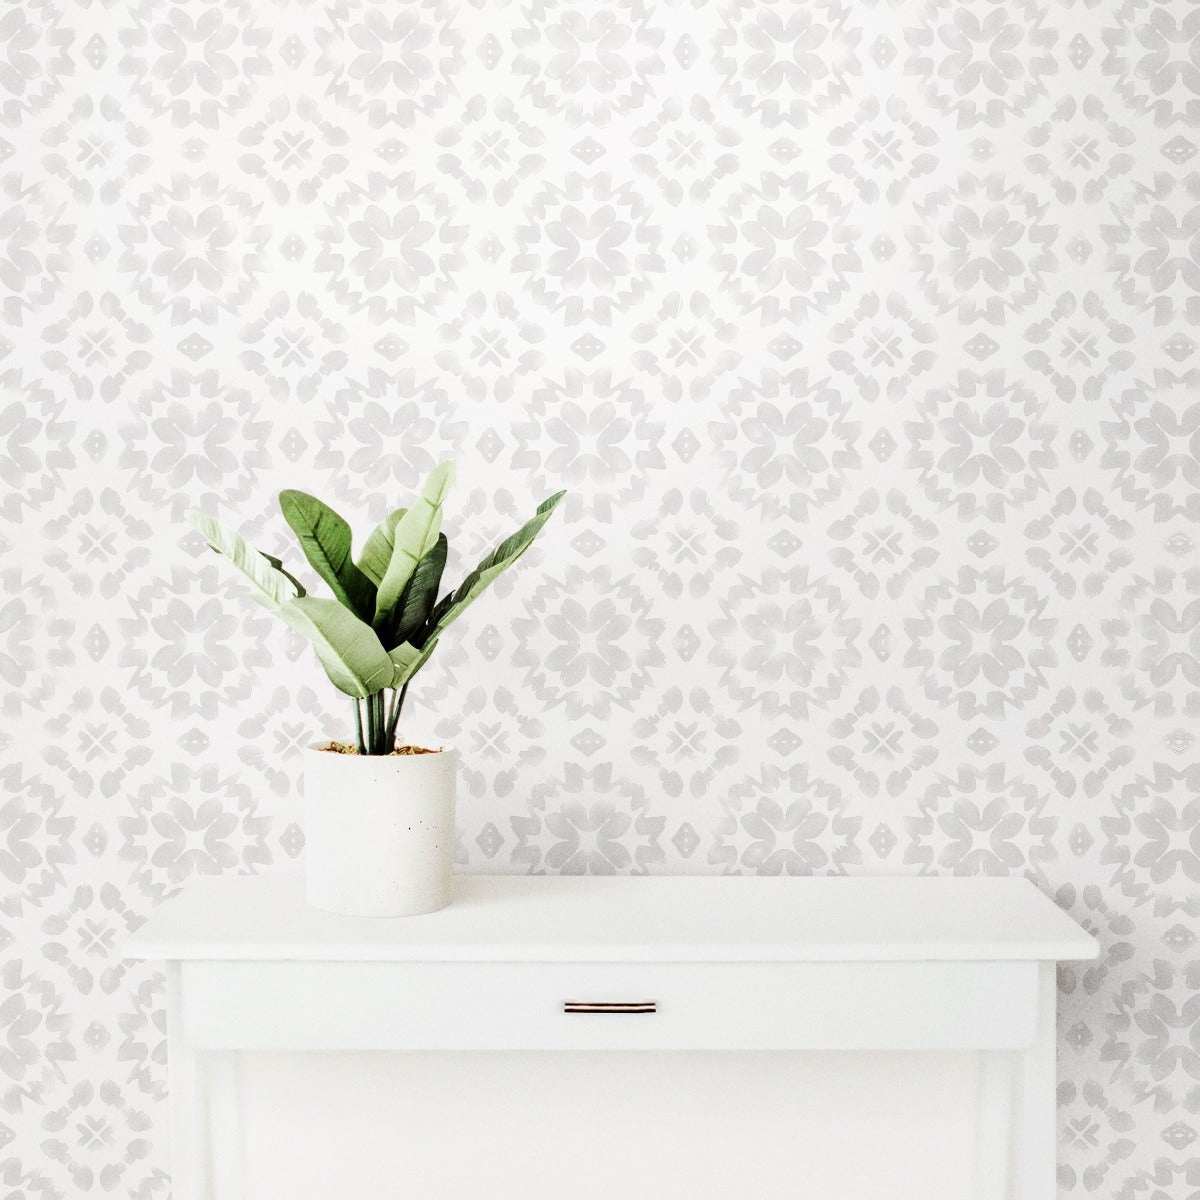 The 'Geometric Watercolor - Muskoka Snow' wallpaper applied in a clean, bright room, complementing a white mantlepiece with a potted plant, creating a minimalist and tranquil space